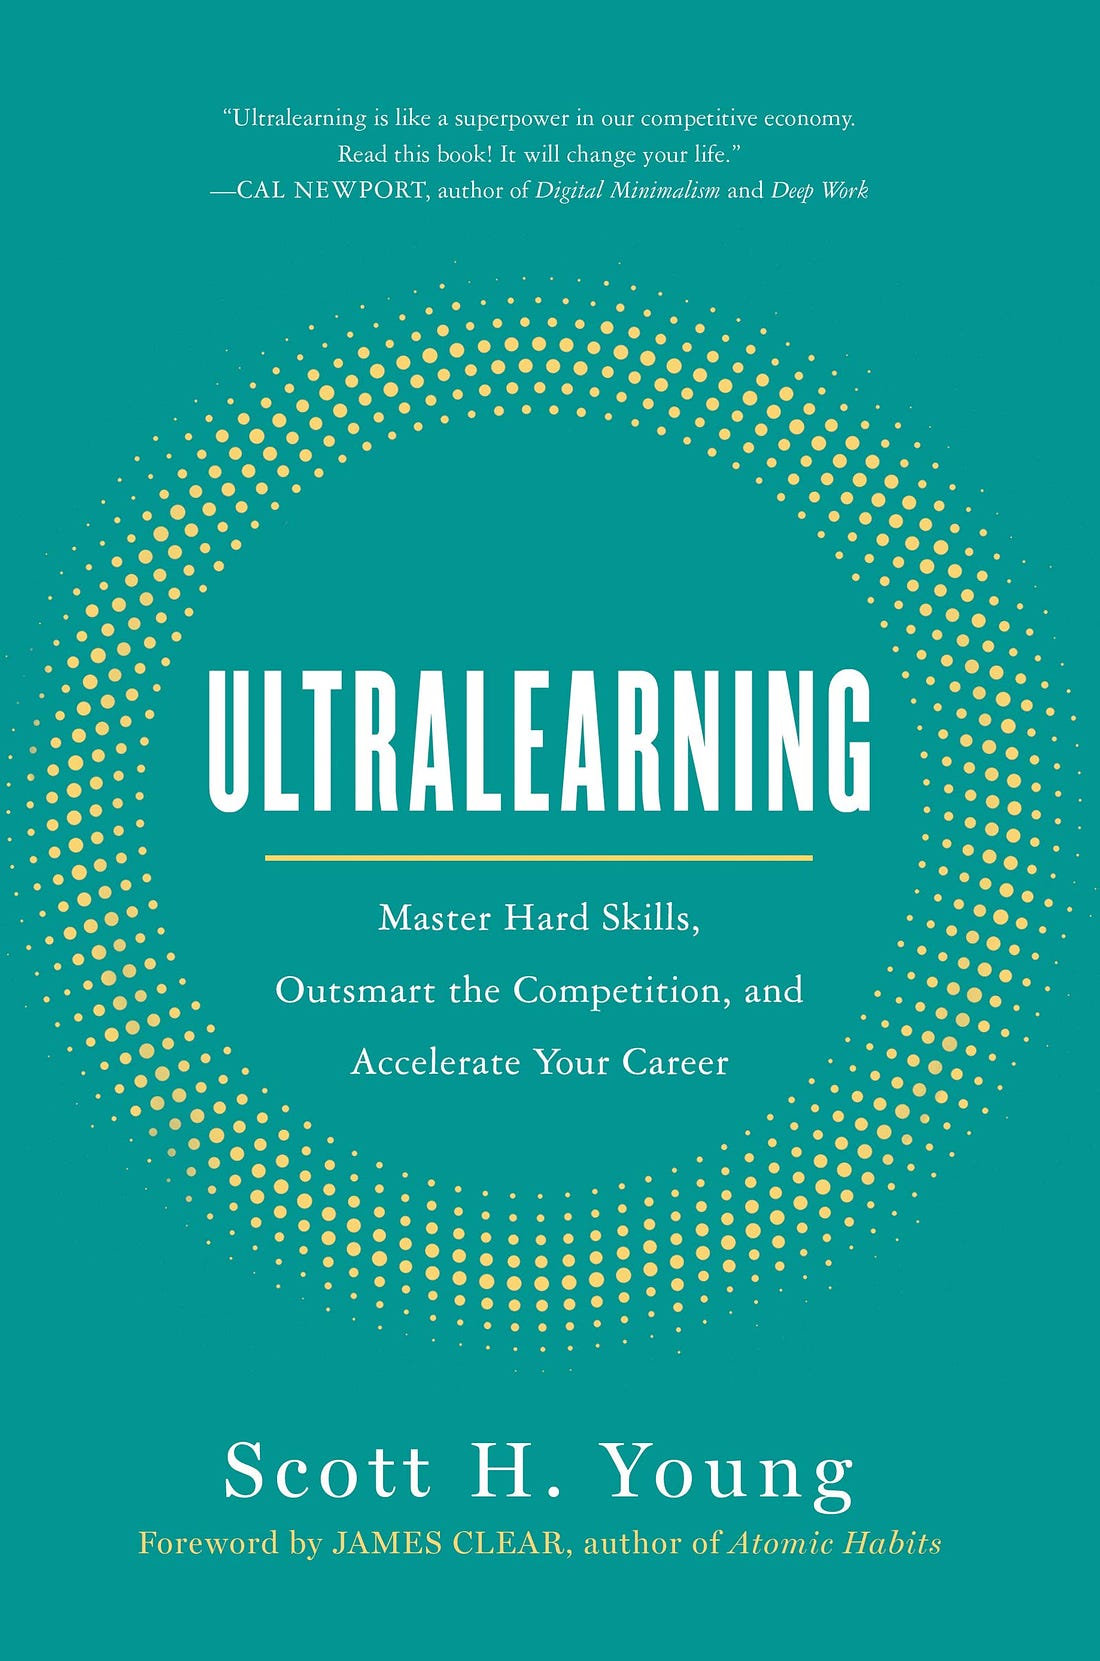 Ultralearning: Master Hard Skills, Outsmart the Competition, and Accelerate  Your Career: Young, Scott, Clear, James: 9780062852687: Amazon.com: Books